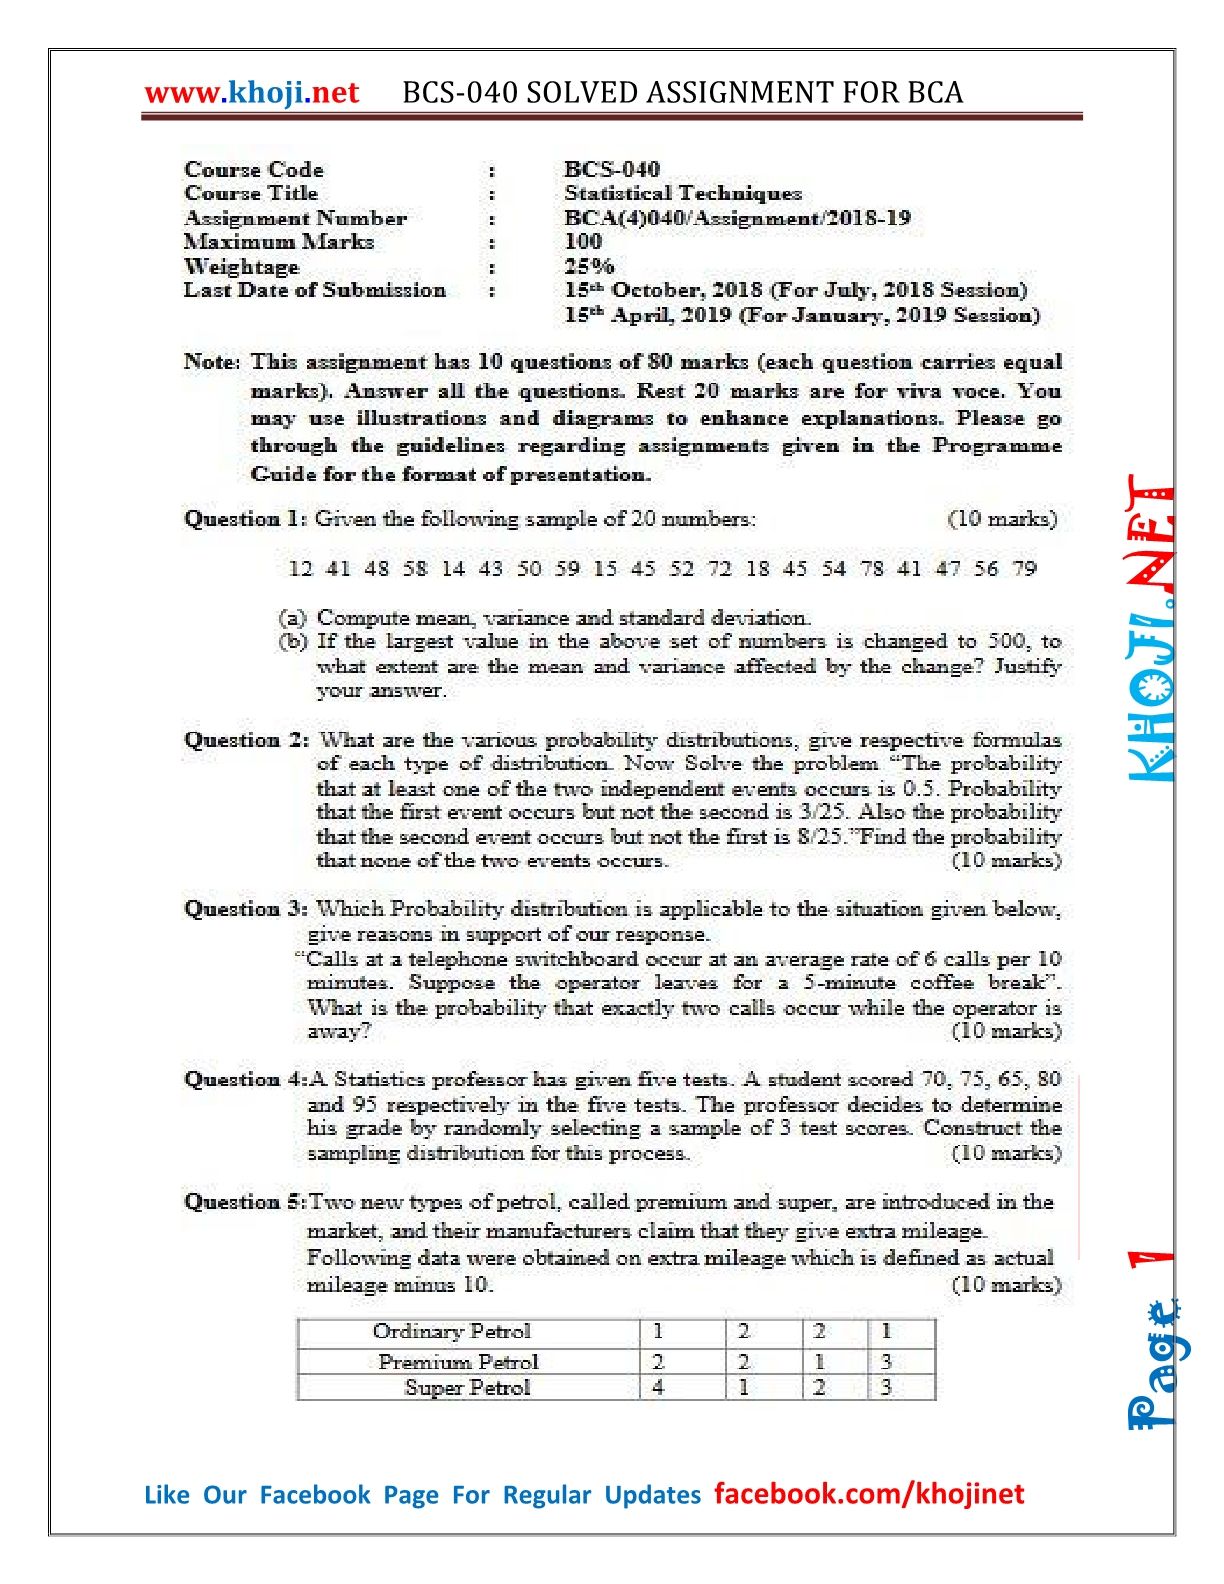 BCS-040 Solved Assignment For IGNOU BCA 2018-2019 in PDF